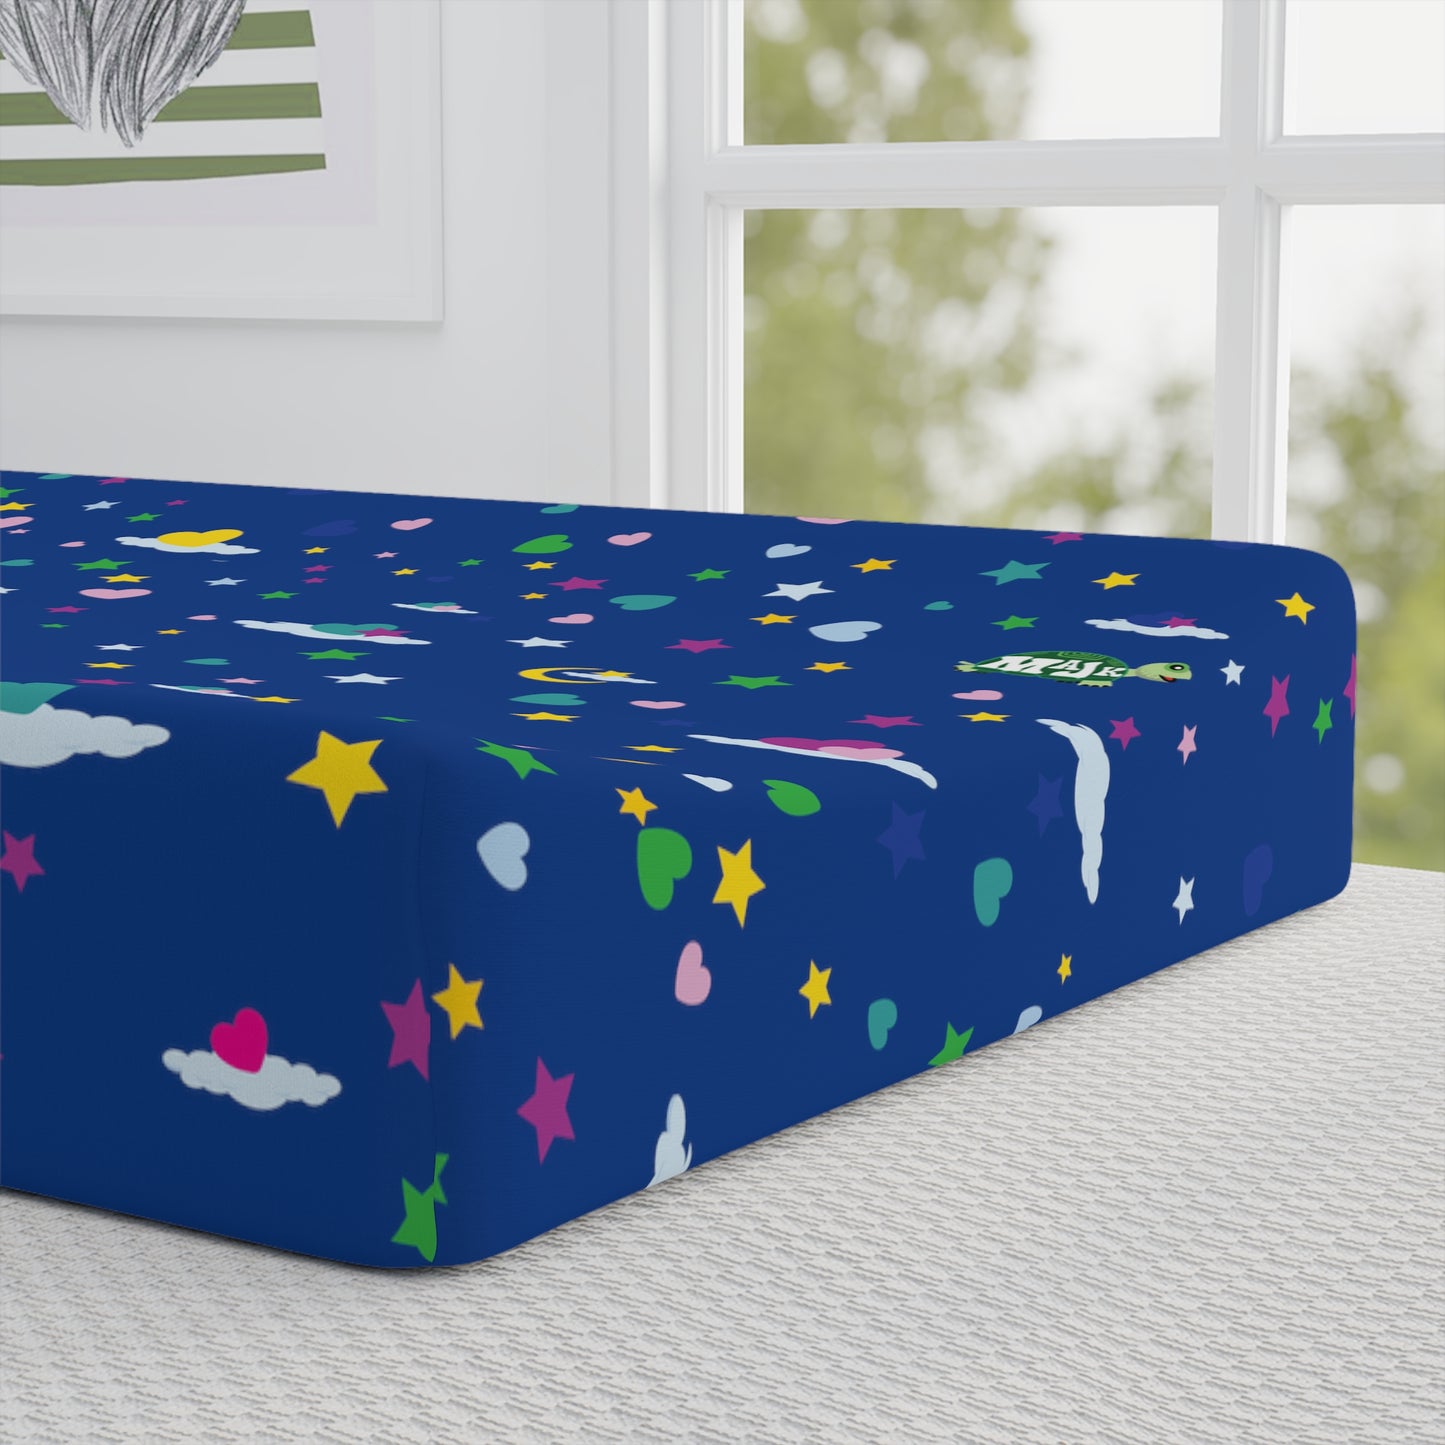 Baby Changing Pad Cover "Sweet Dreams Little One Collection" (Royal Blue)